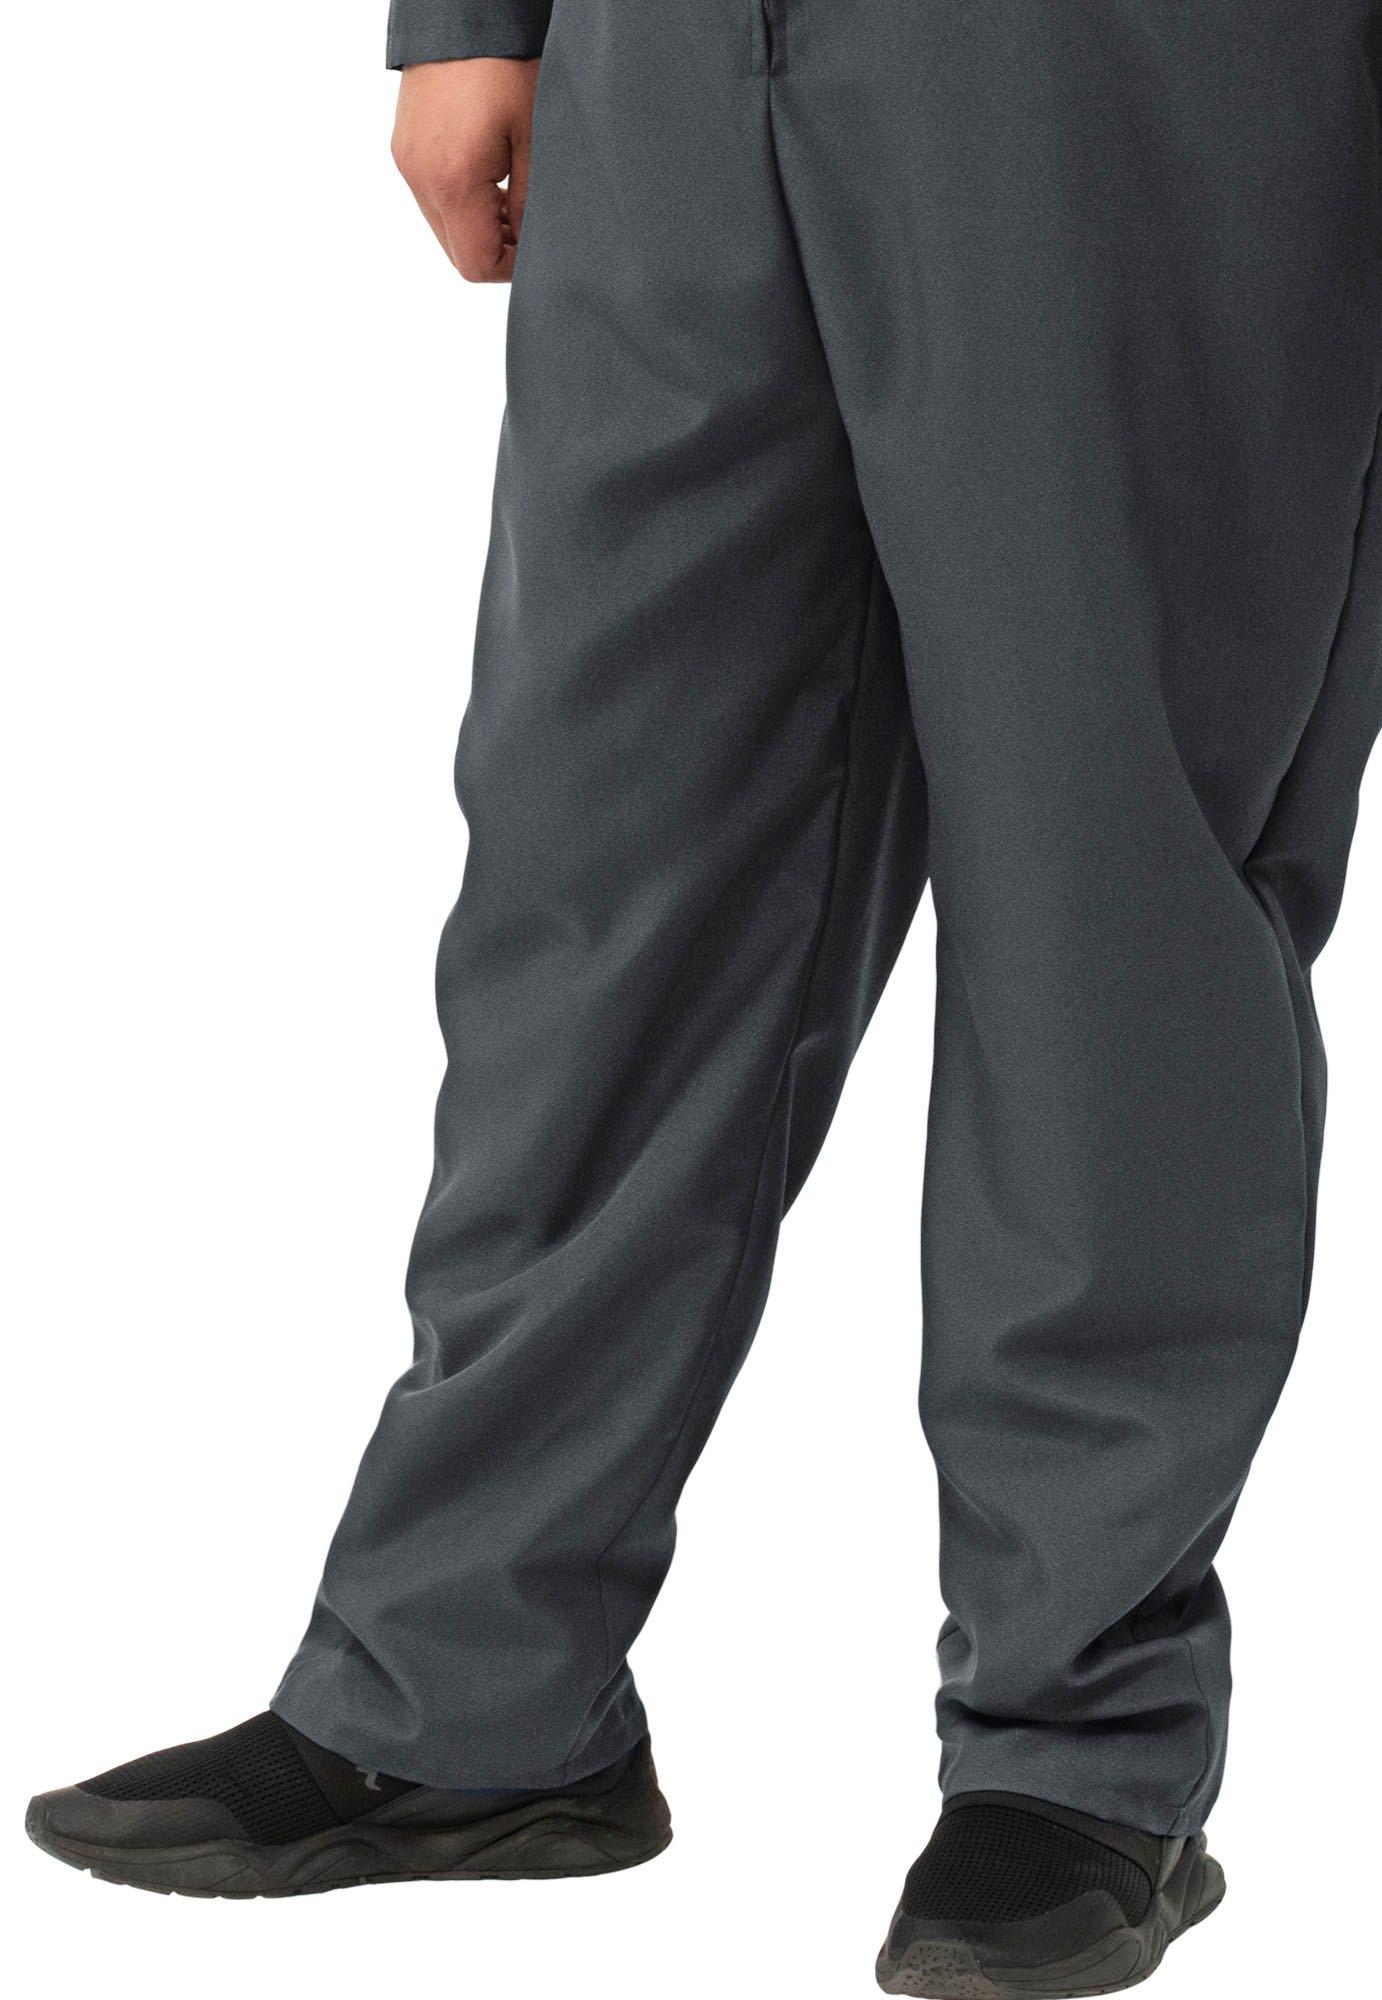 Adult Gray Plus Size Mechanic Coverall Jumpsuit